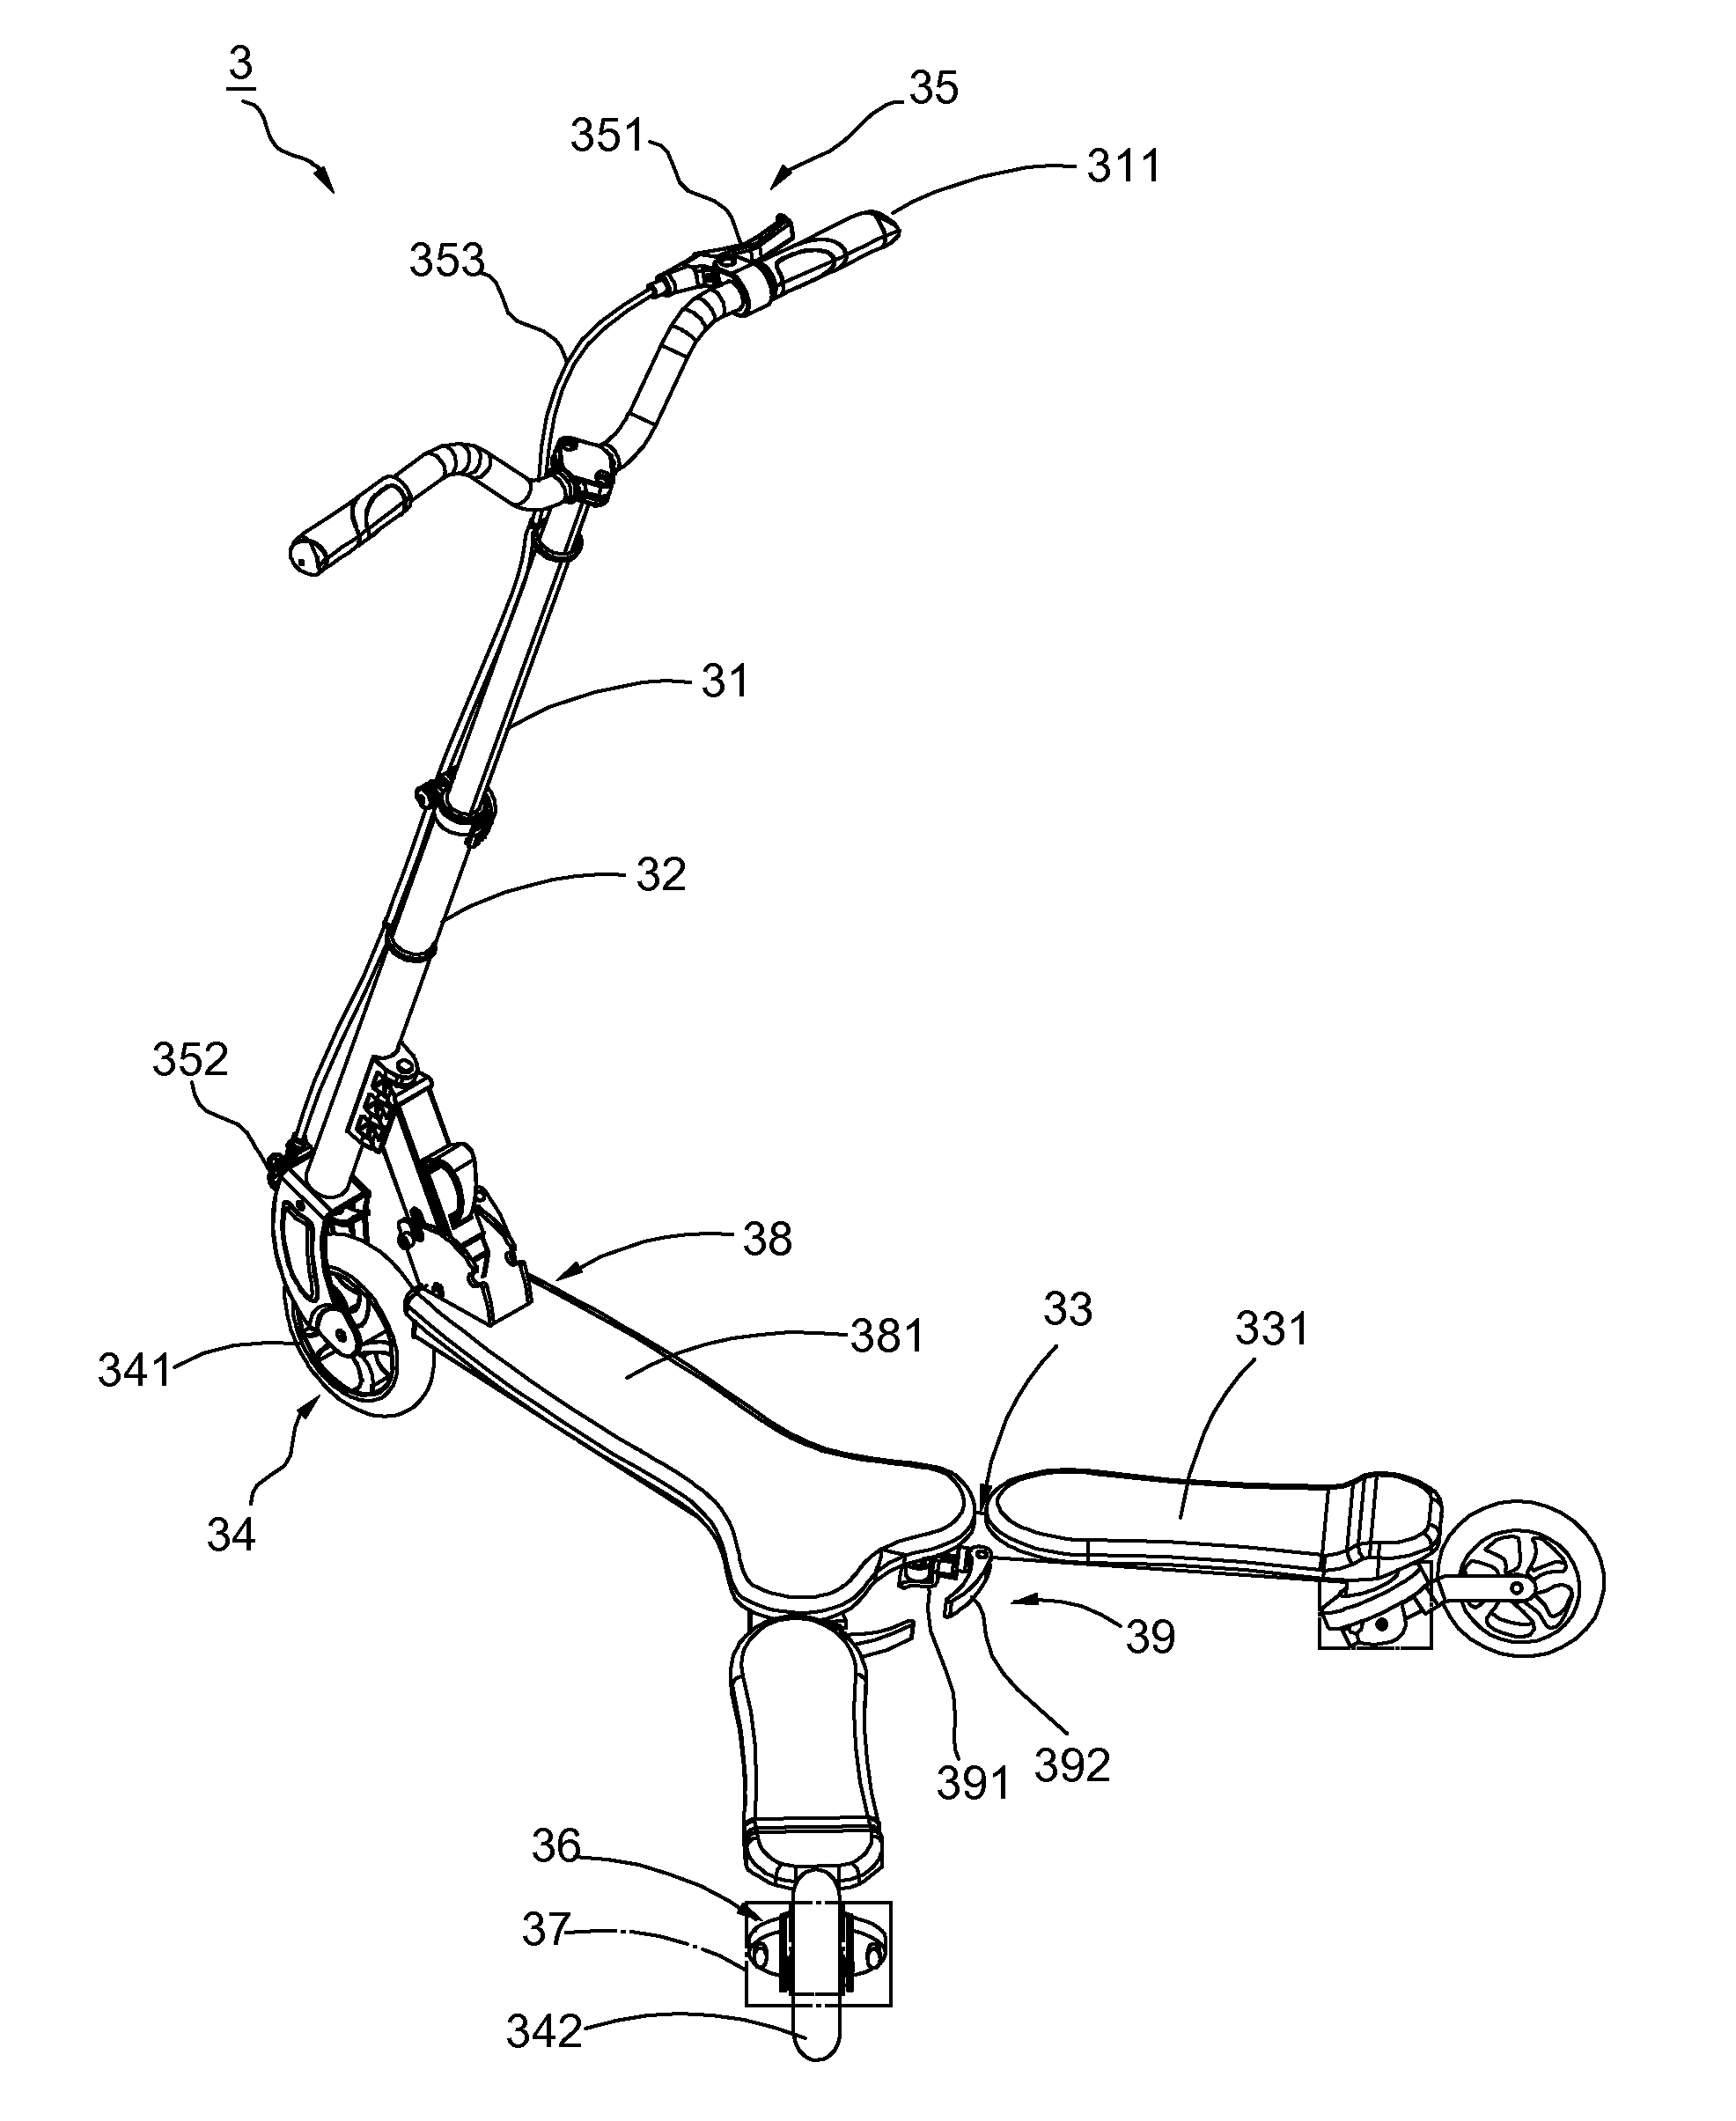 Manual-swinging scooter